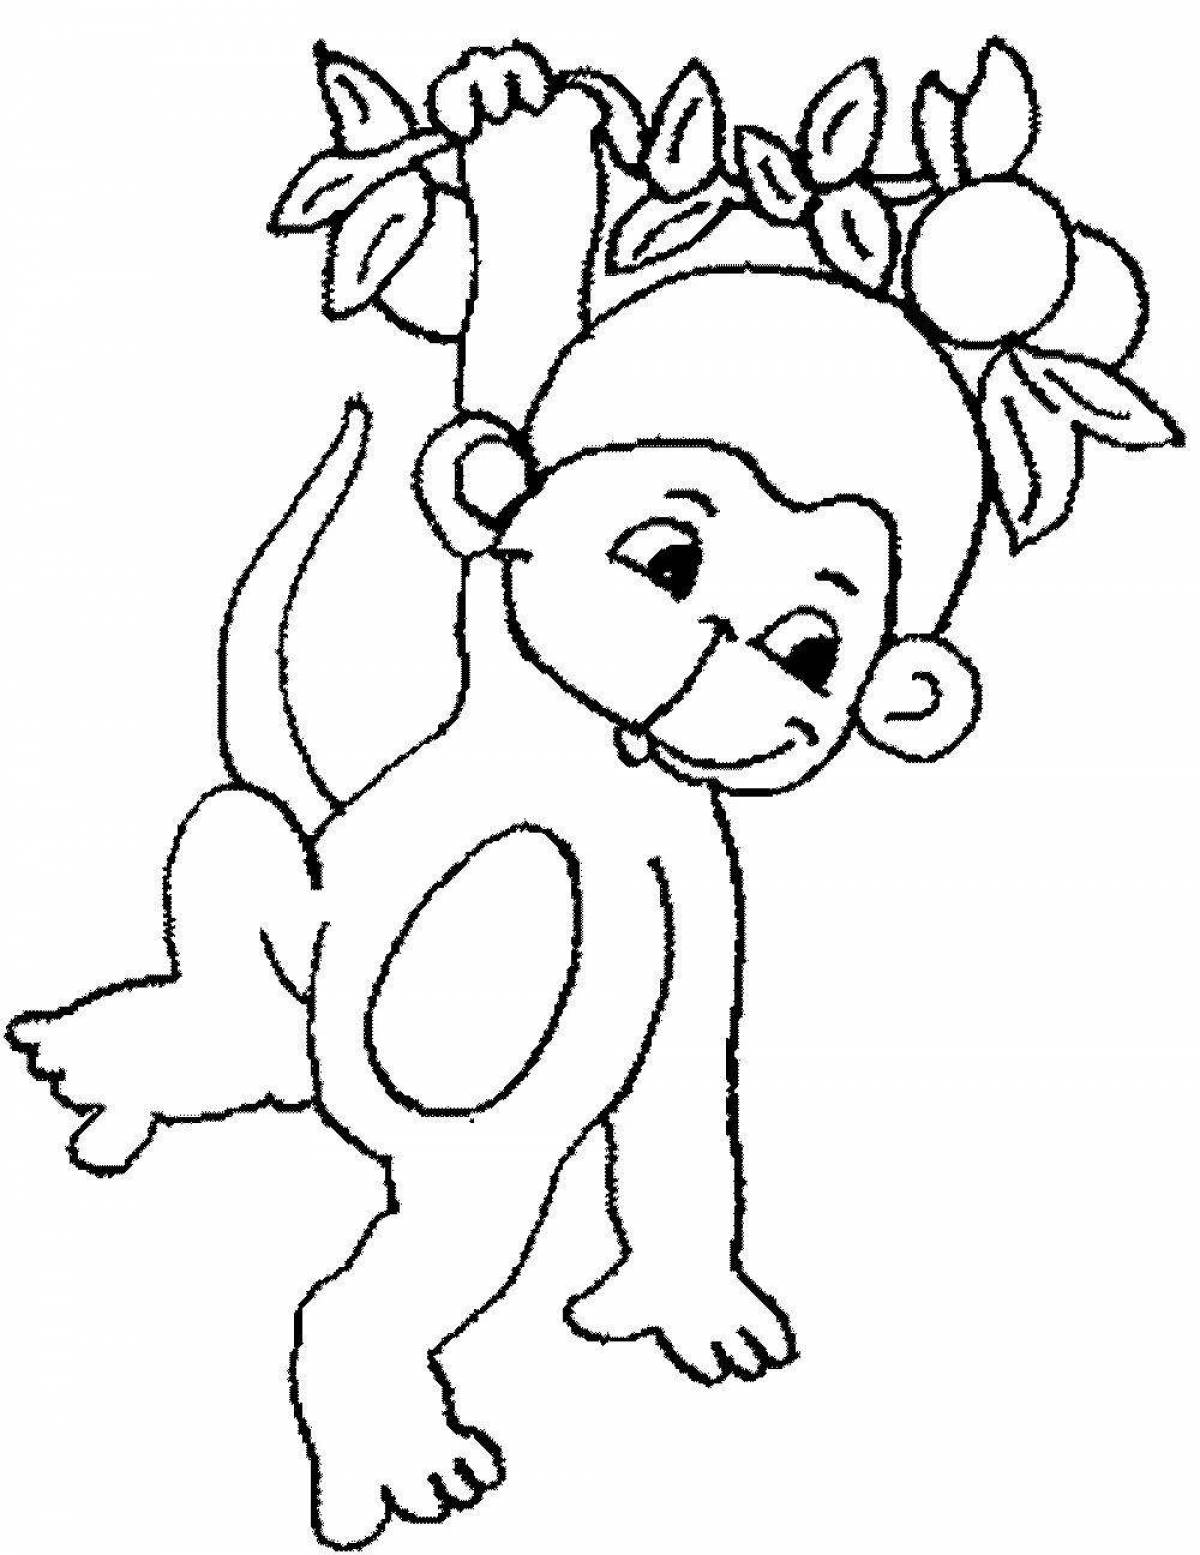 Delightful monkey coloring book